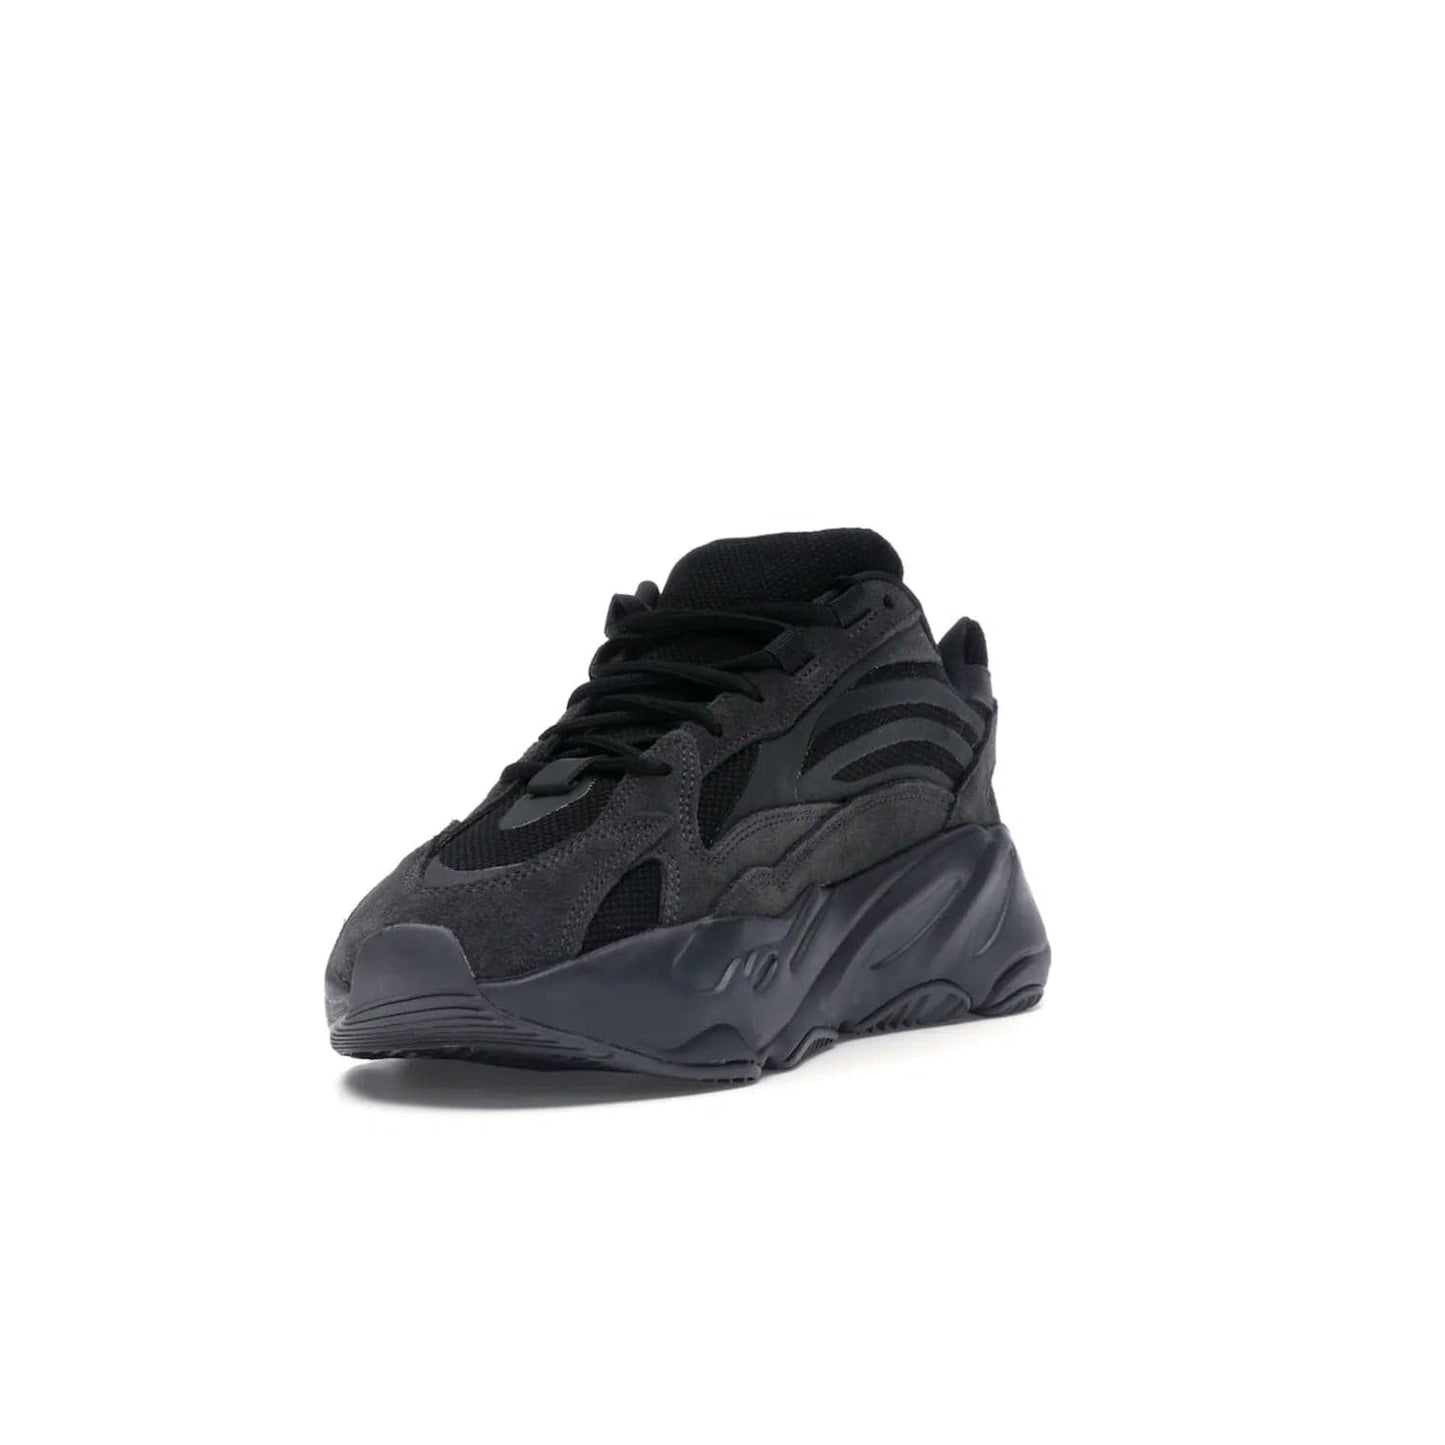 adidas Yeezy Boost 700 V2 Vanta - Image 13 - Only at www.BallersClubKickz.com - Introducing the adidas Yeezy Boost 700 V2 Vanta - a sleek and stylish all-black design featuring a combination of mesh, leather, and suede construction with signature Boost cushioning in the sole. The ultimate in comfort and support.